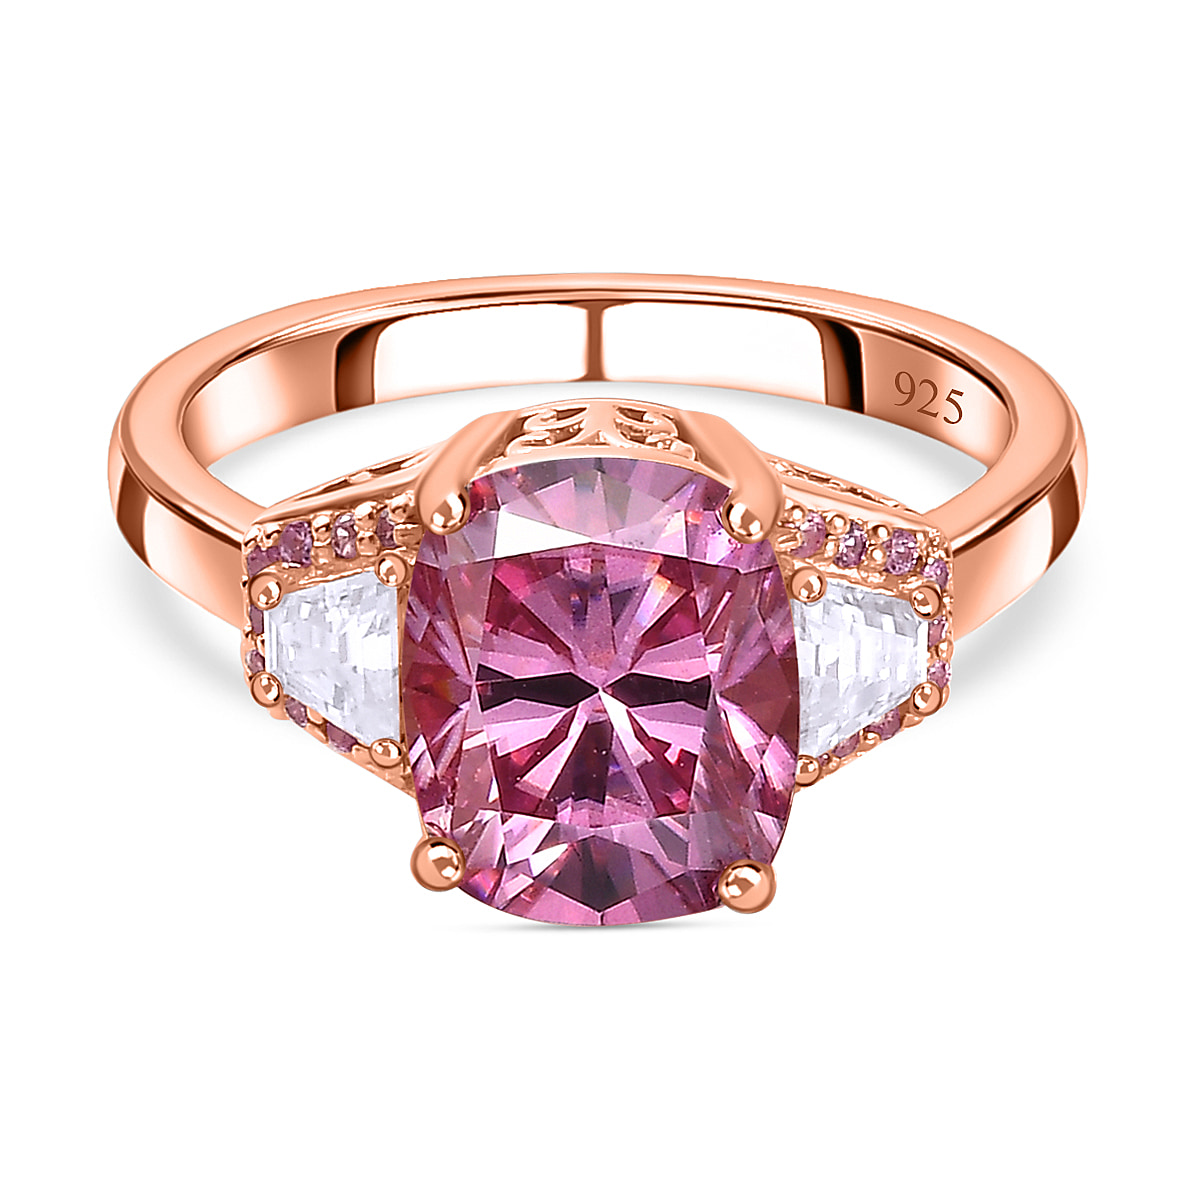 PINK STAR Pink and White Moissanite & Sapphire Ring in 18K Rose Gold Vermeil Plated Sterling Silver 3.53 Ct.